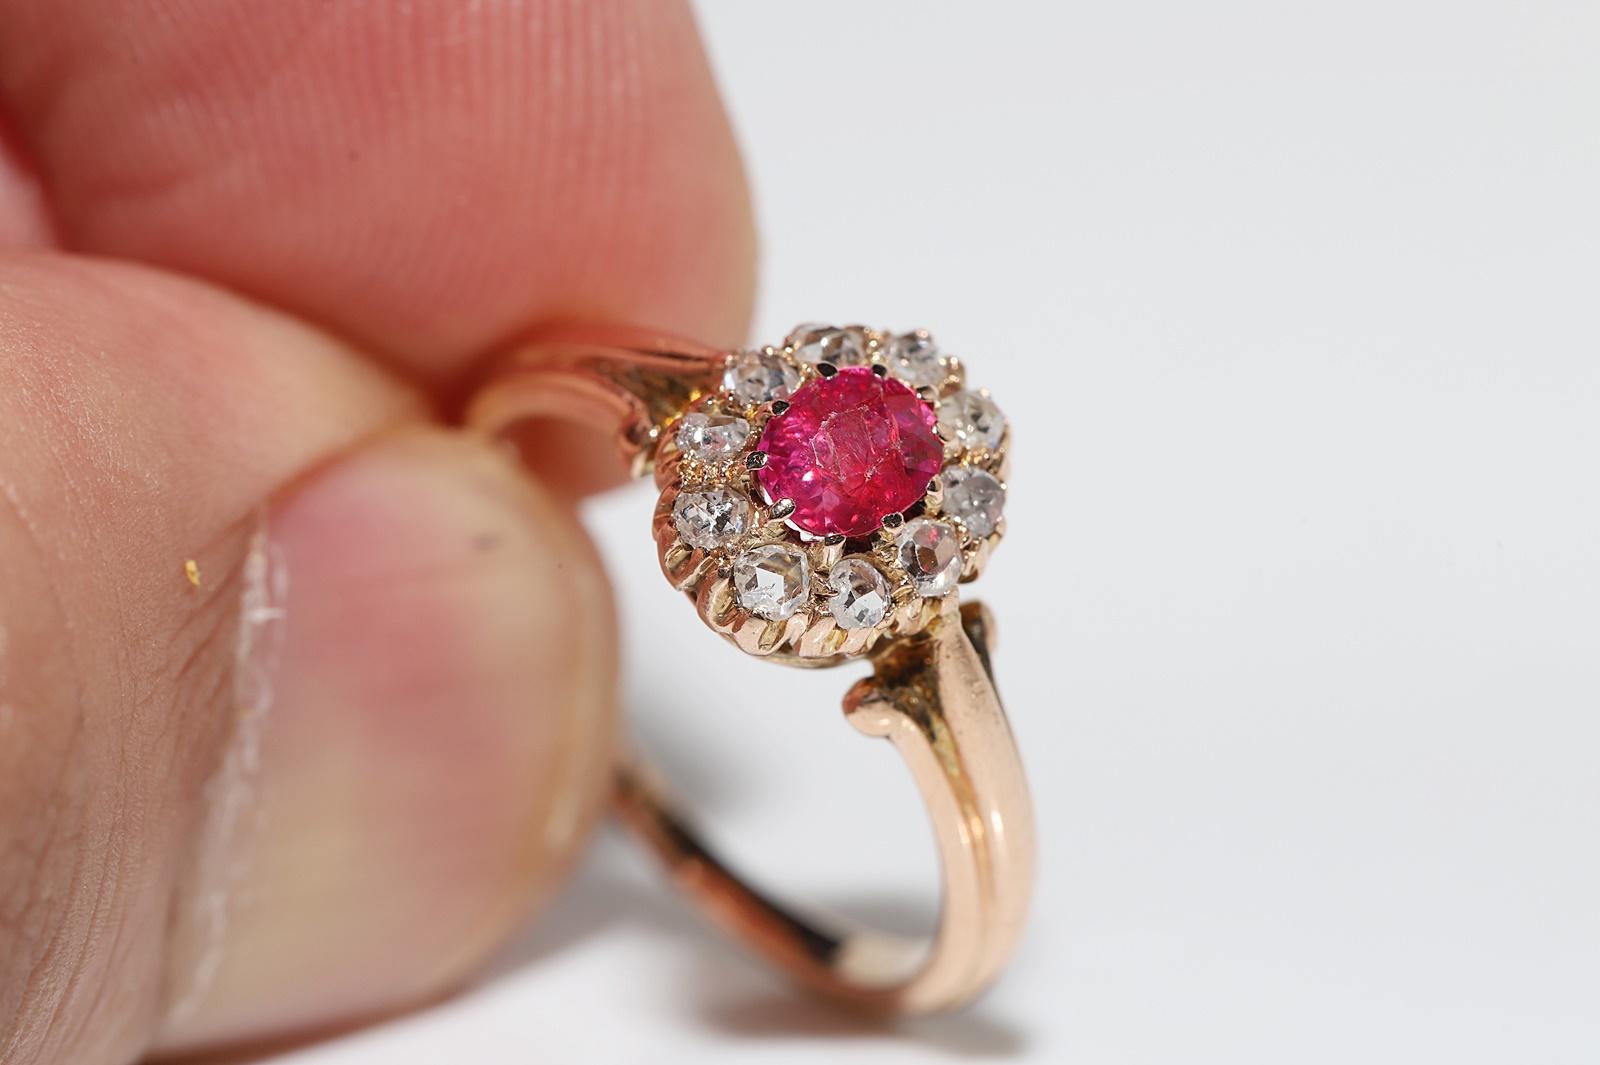 Antique Circa 1900s 14k Gold Natural Rose Cut Diamond And Ruby Decorated Ring 5